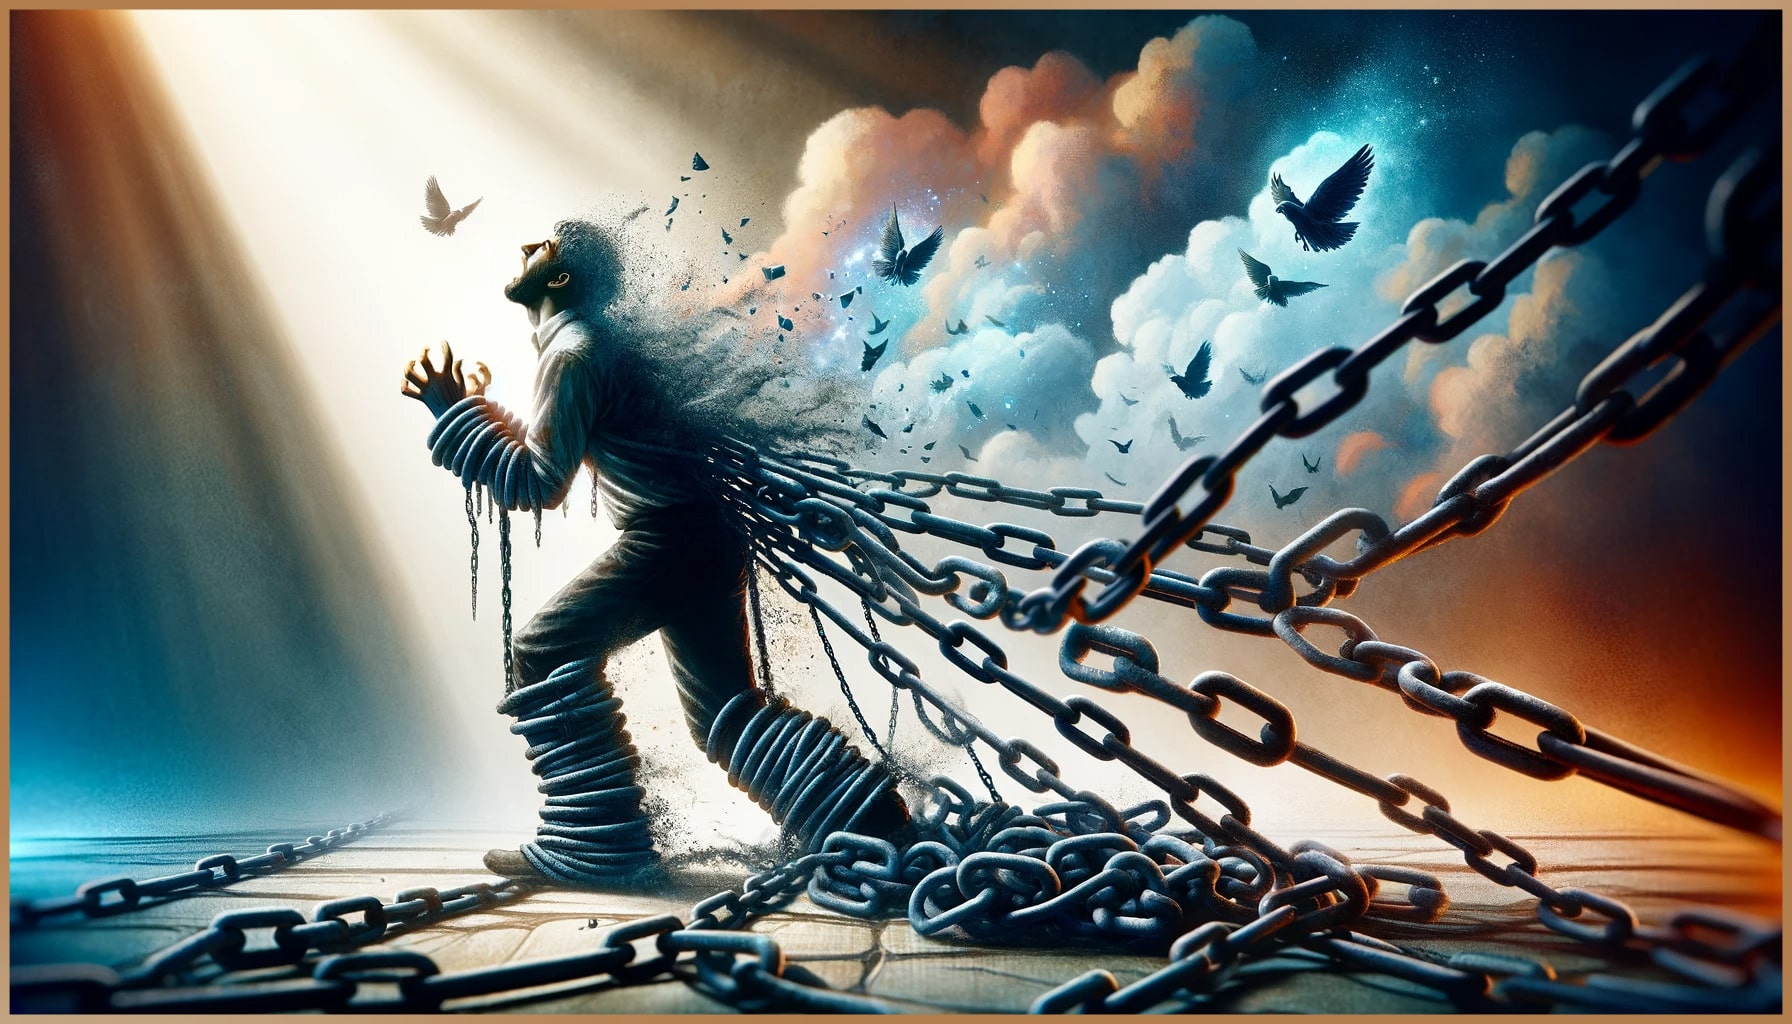 A person breaking free from heavy chains representing old beliefs, symbolizing the journey towards self-love.